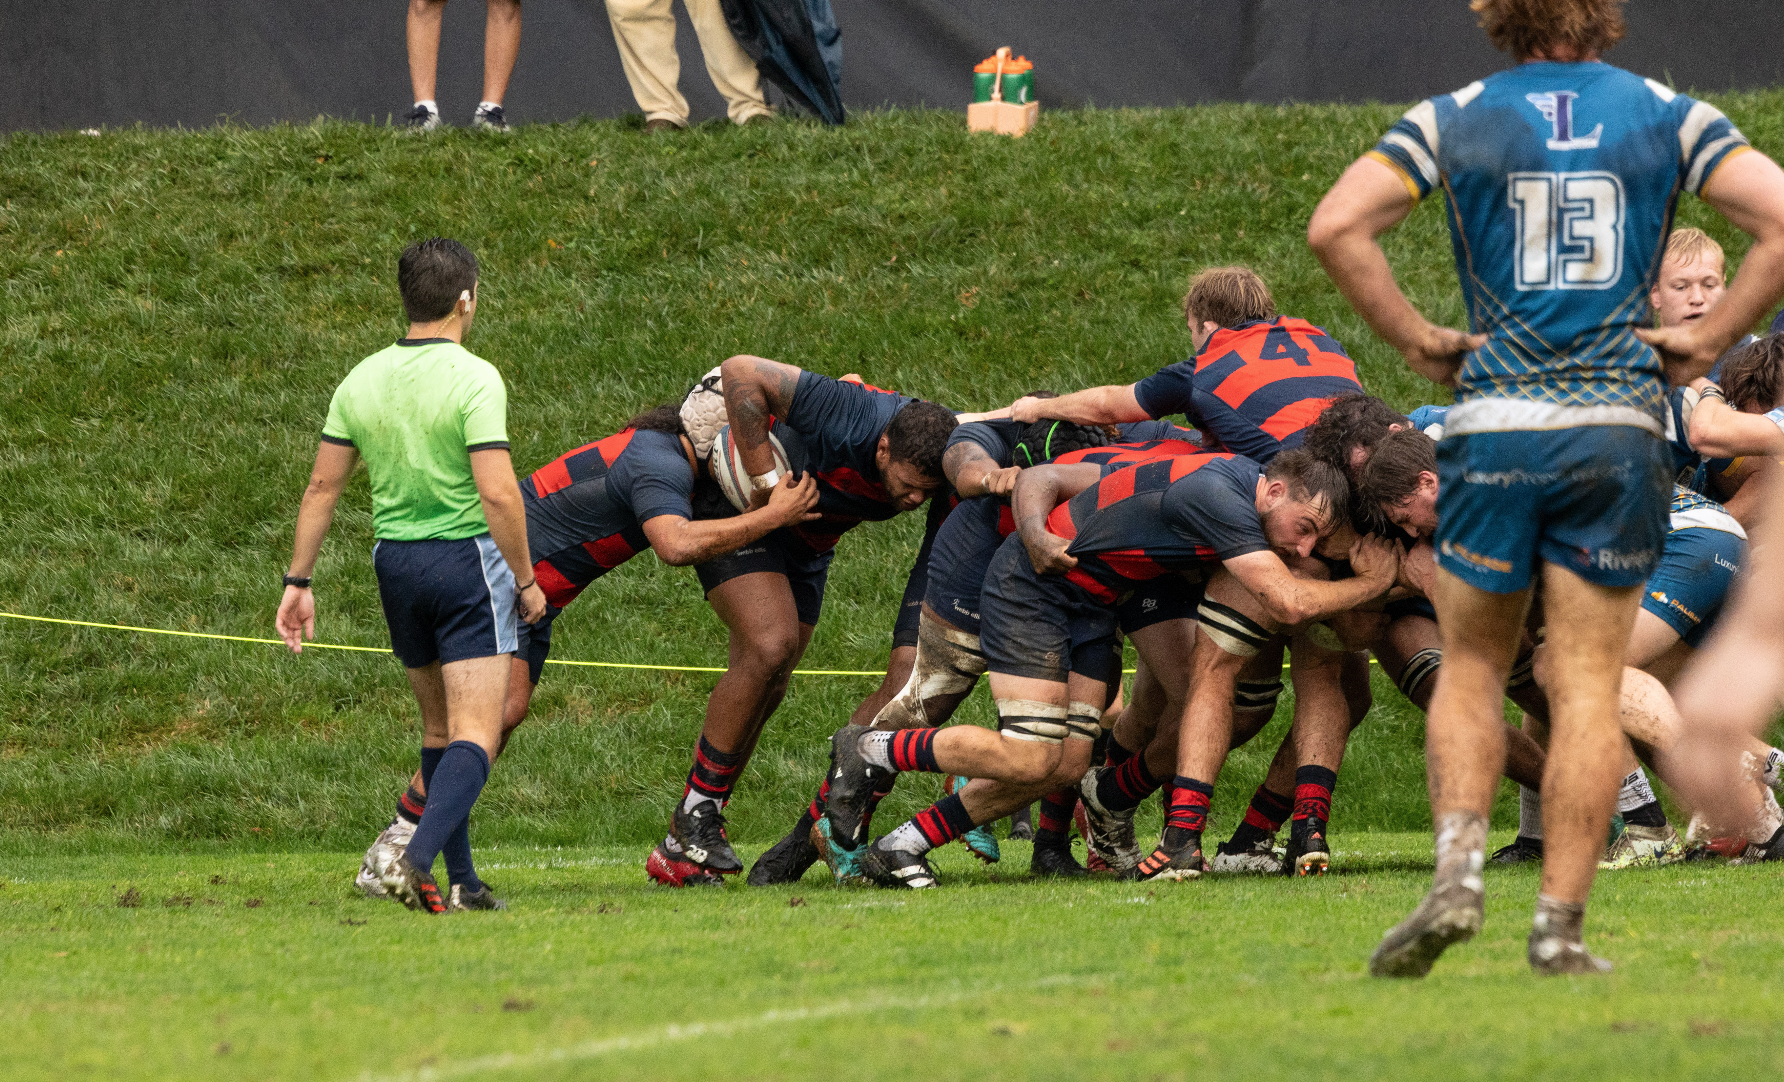 Men's Rugby in the scrum